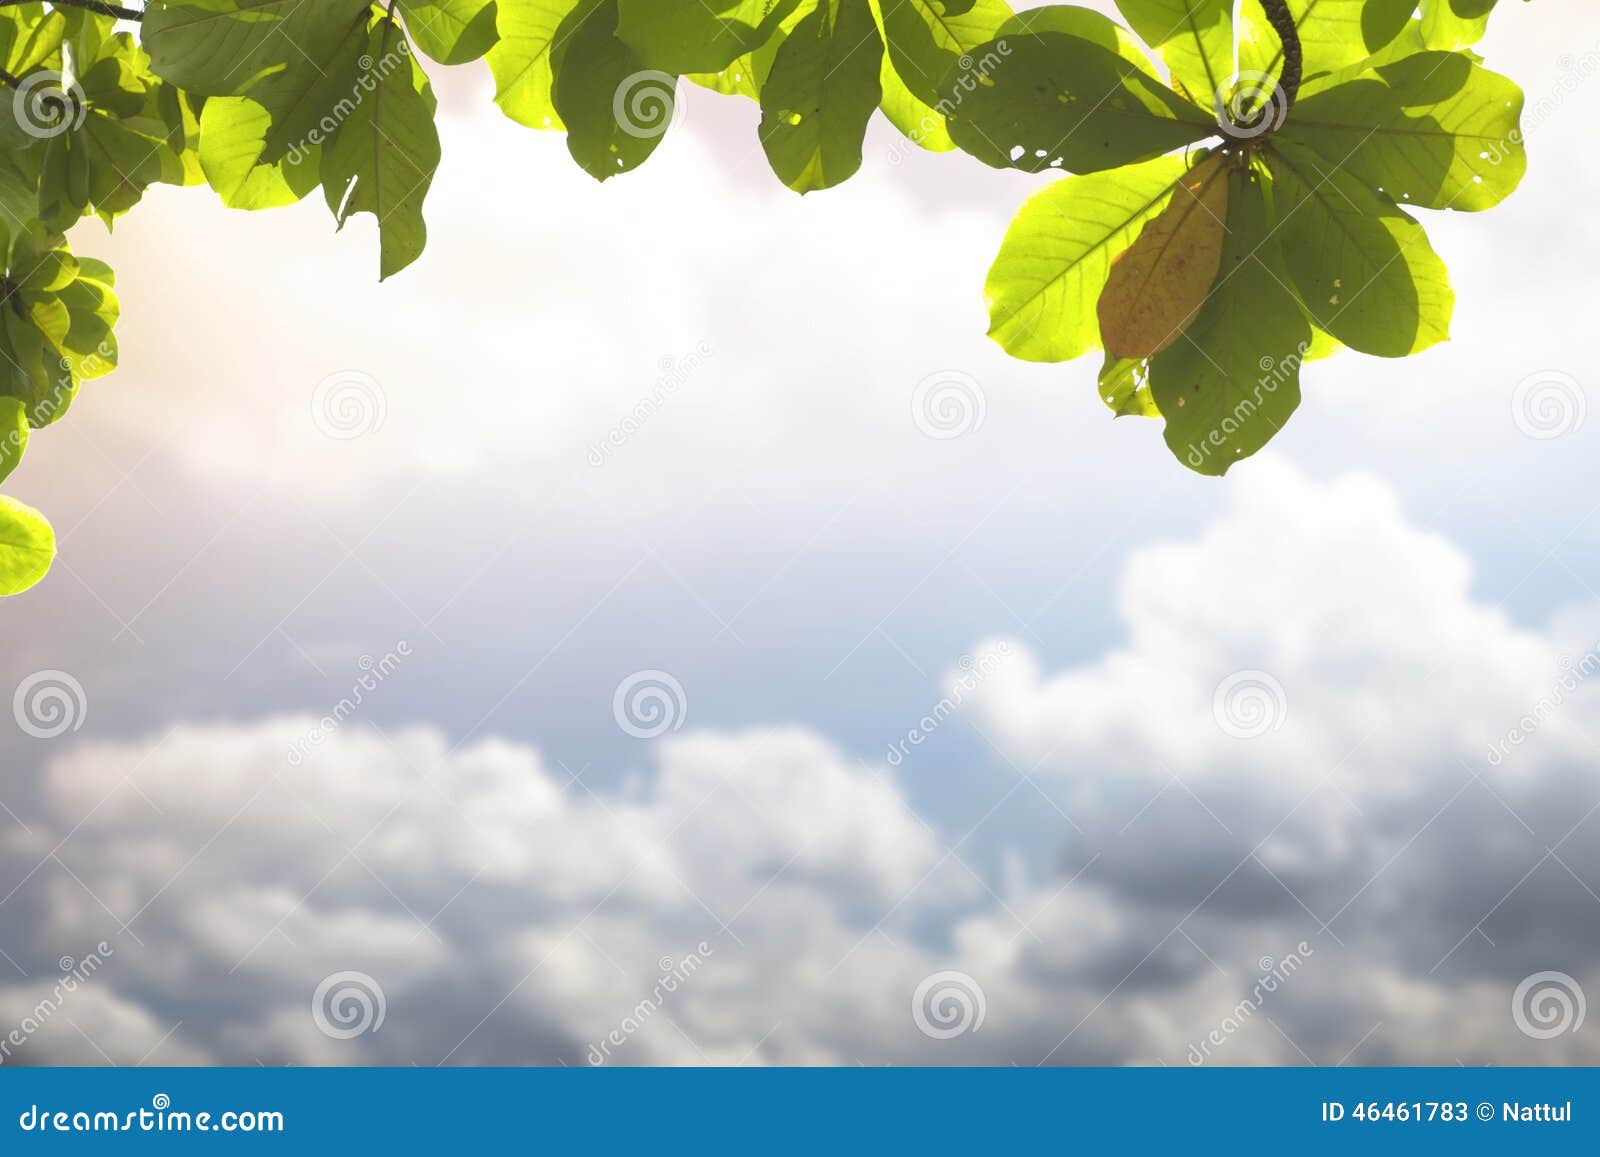 Abstract blurry cloud with leaves frame background